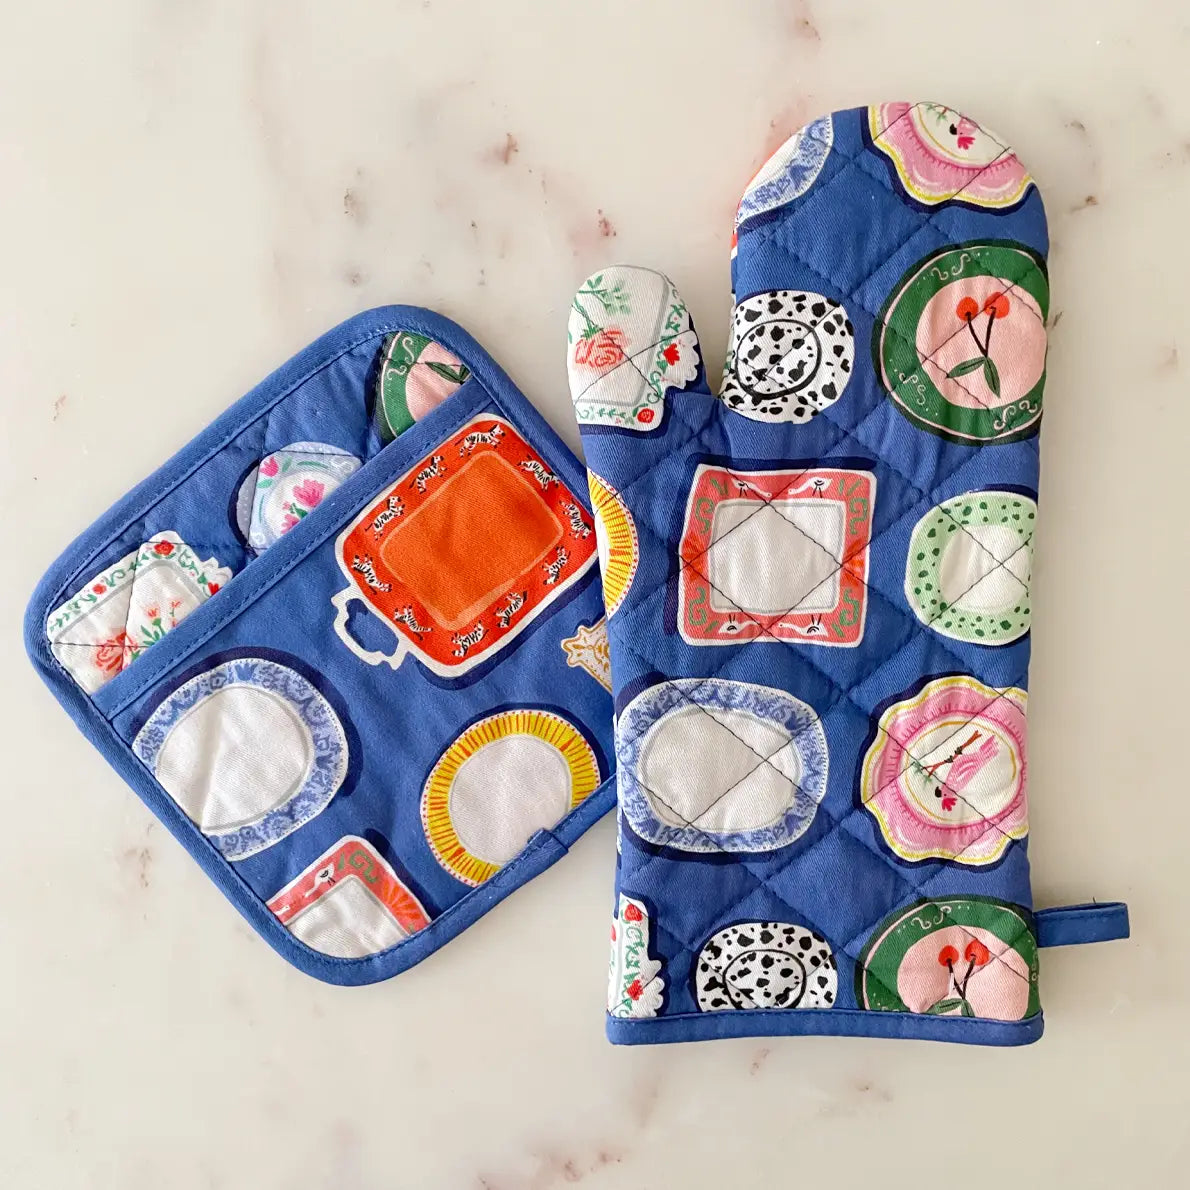 Idlewild Co. Dinner Plates Oven Mitt + Pot Holder Set | Prelude and Dawn Los Angeles, CA